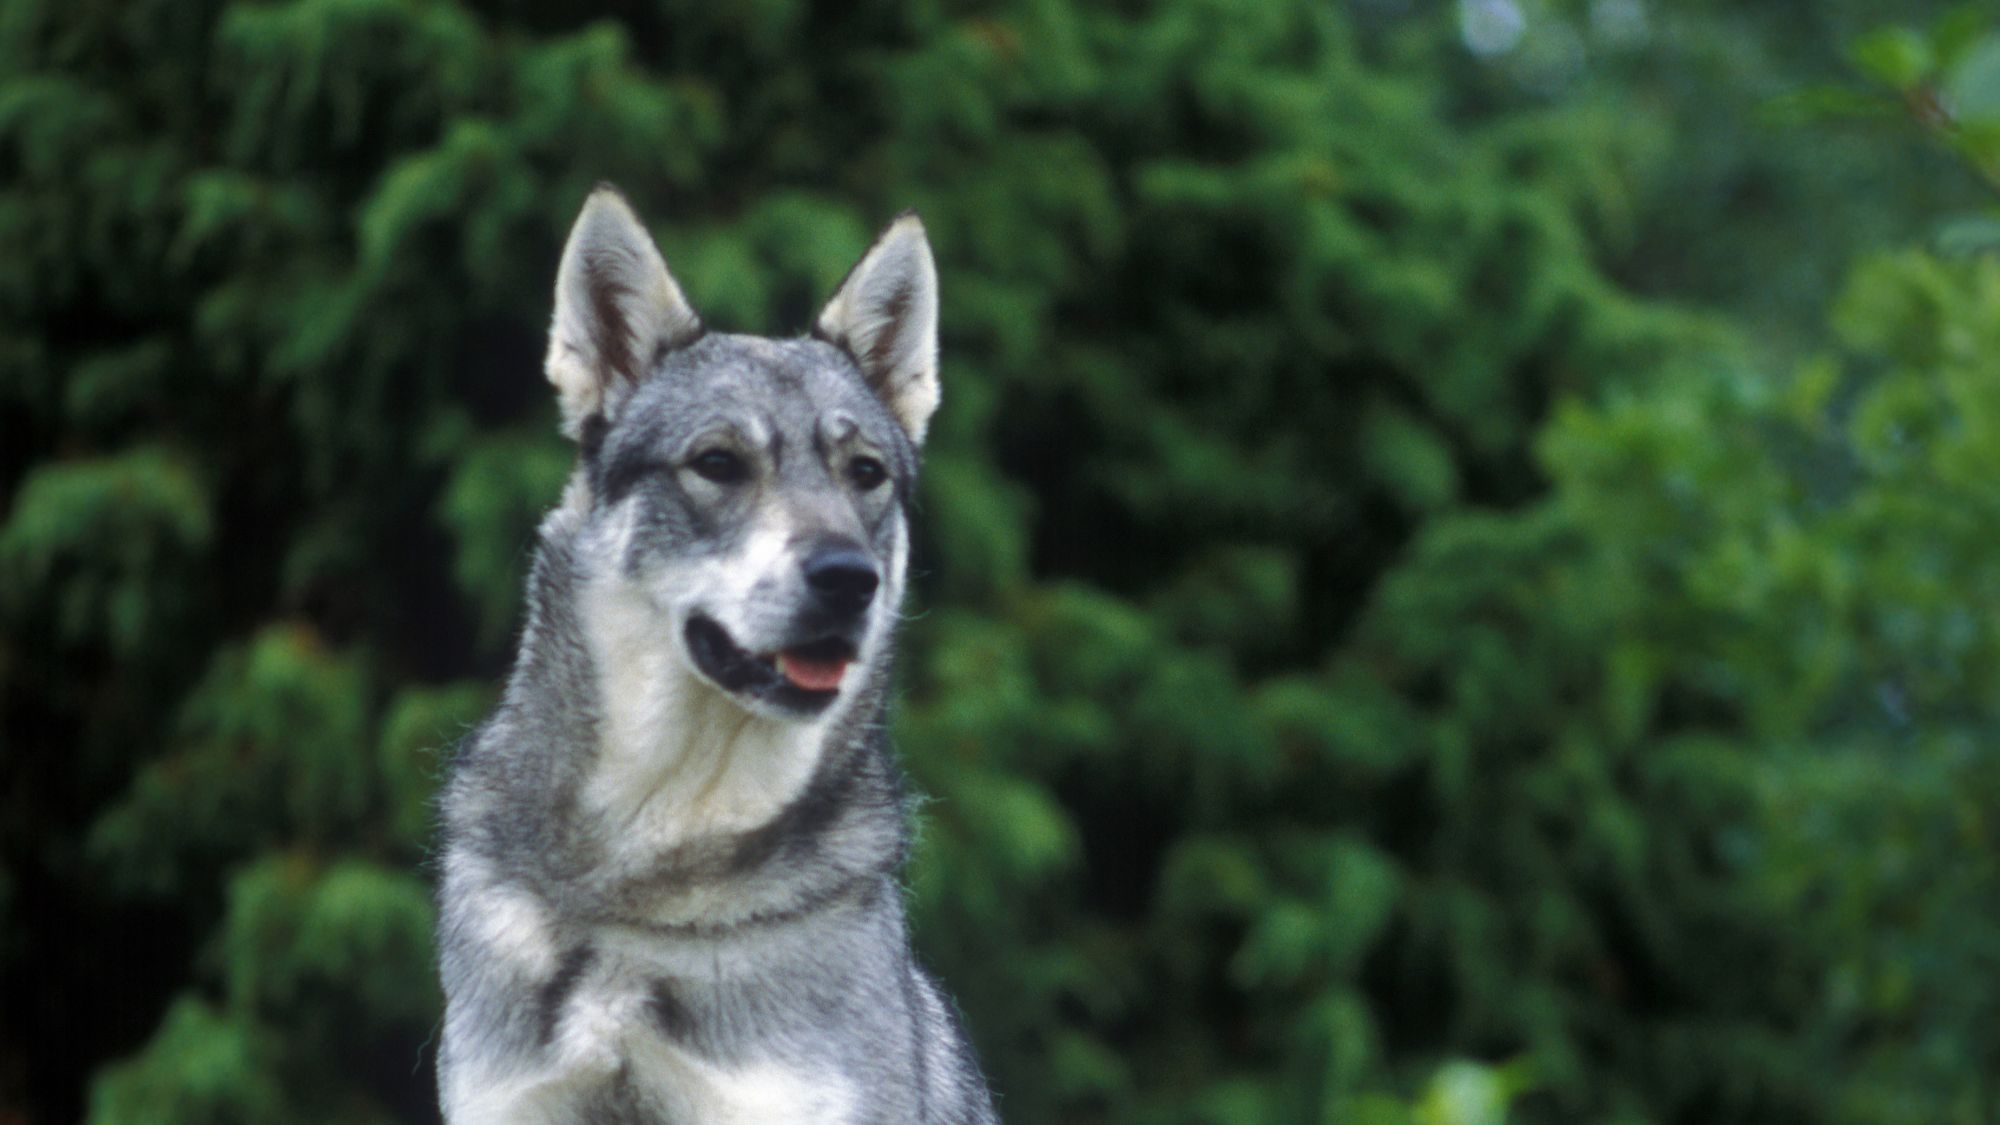 Close-up of Swedish Elkhound looking past the camera, trees in the background